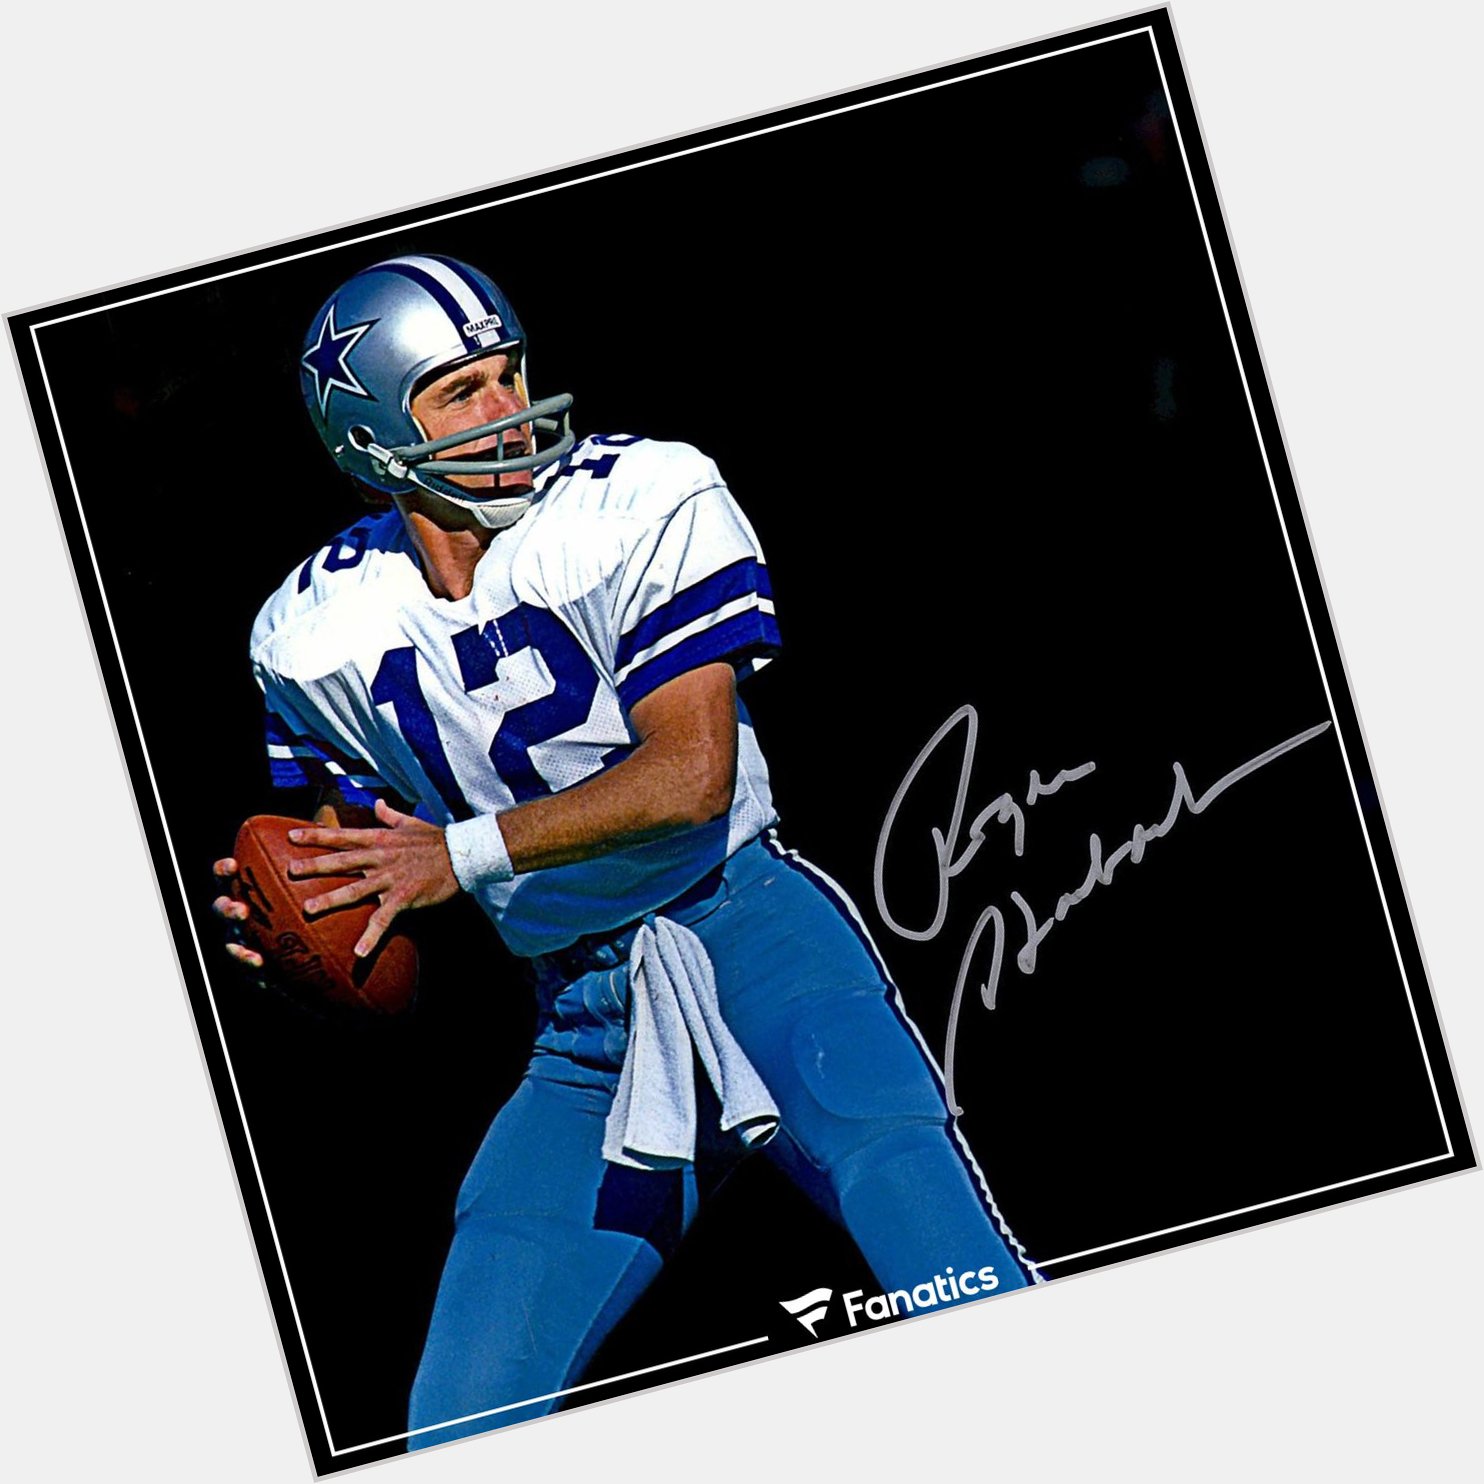 Join us in wishing 2x Champion Roger Staubach a very Happy Birthday! 